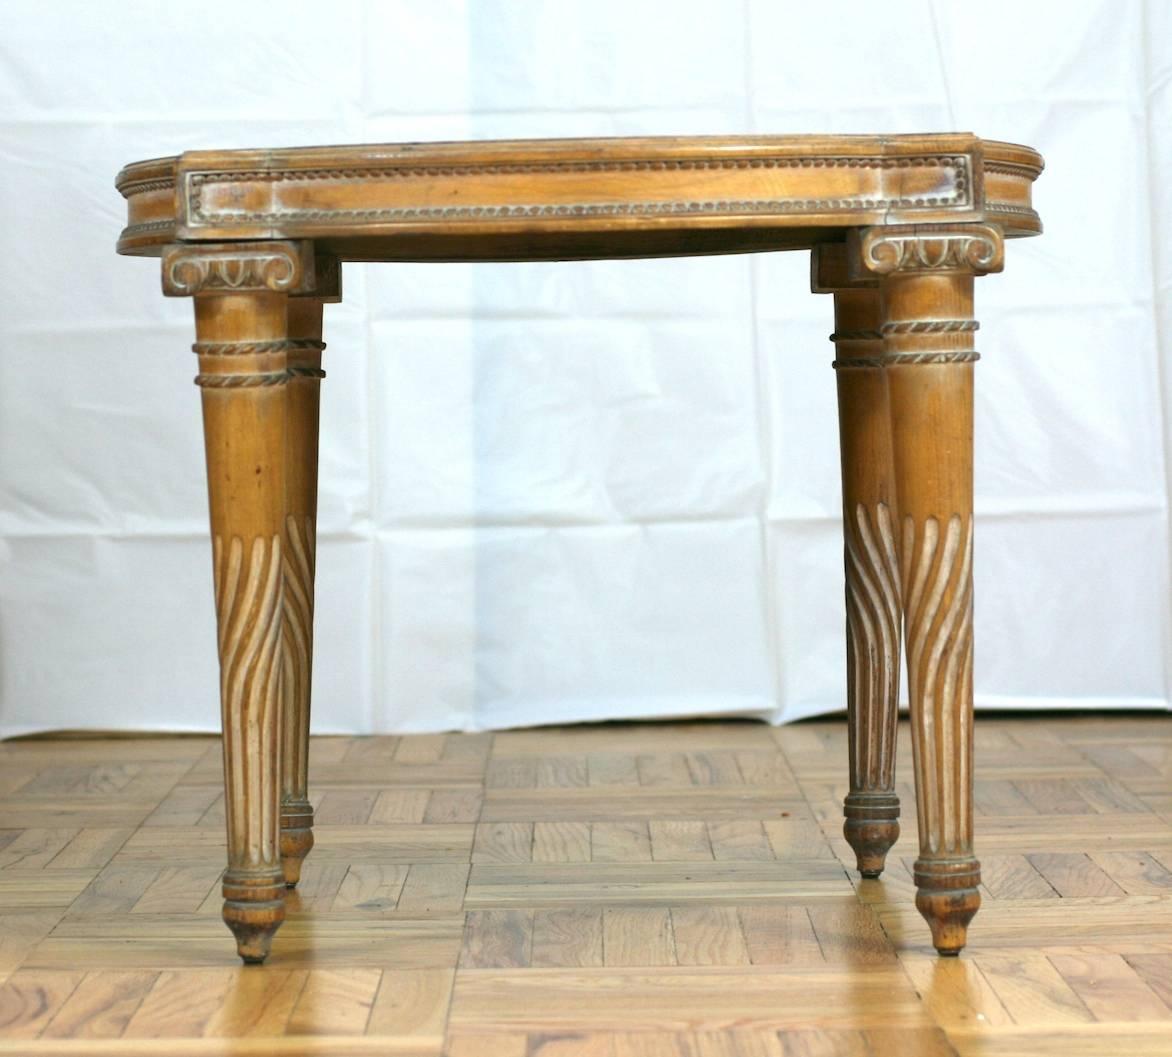 Neoclassical Revival Mirrored Table In Good Condition For Sale In Riverdale, NY